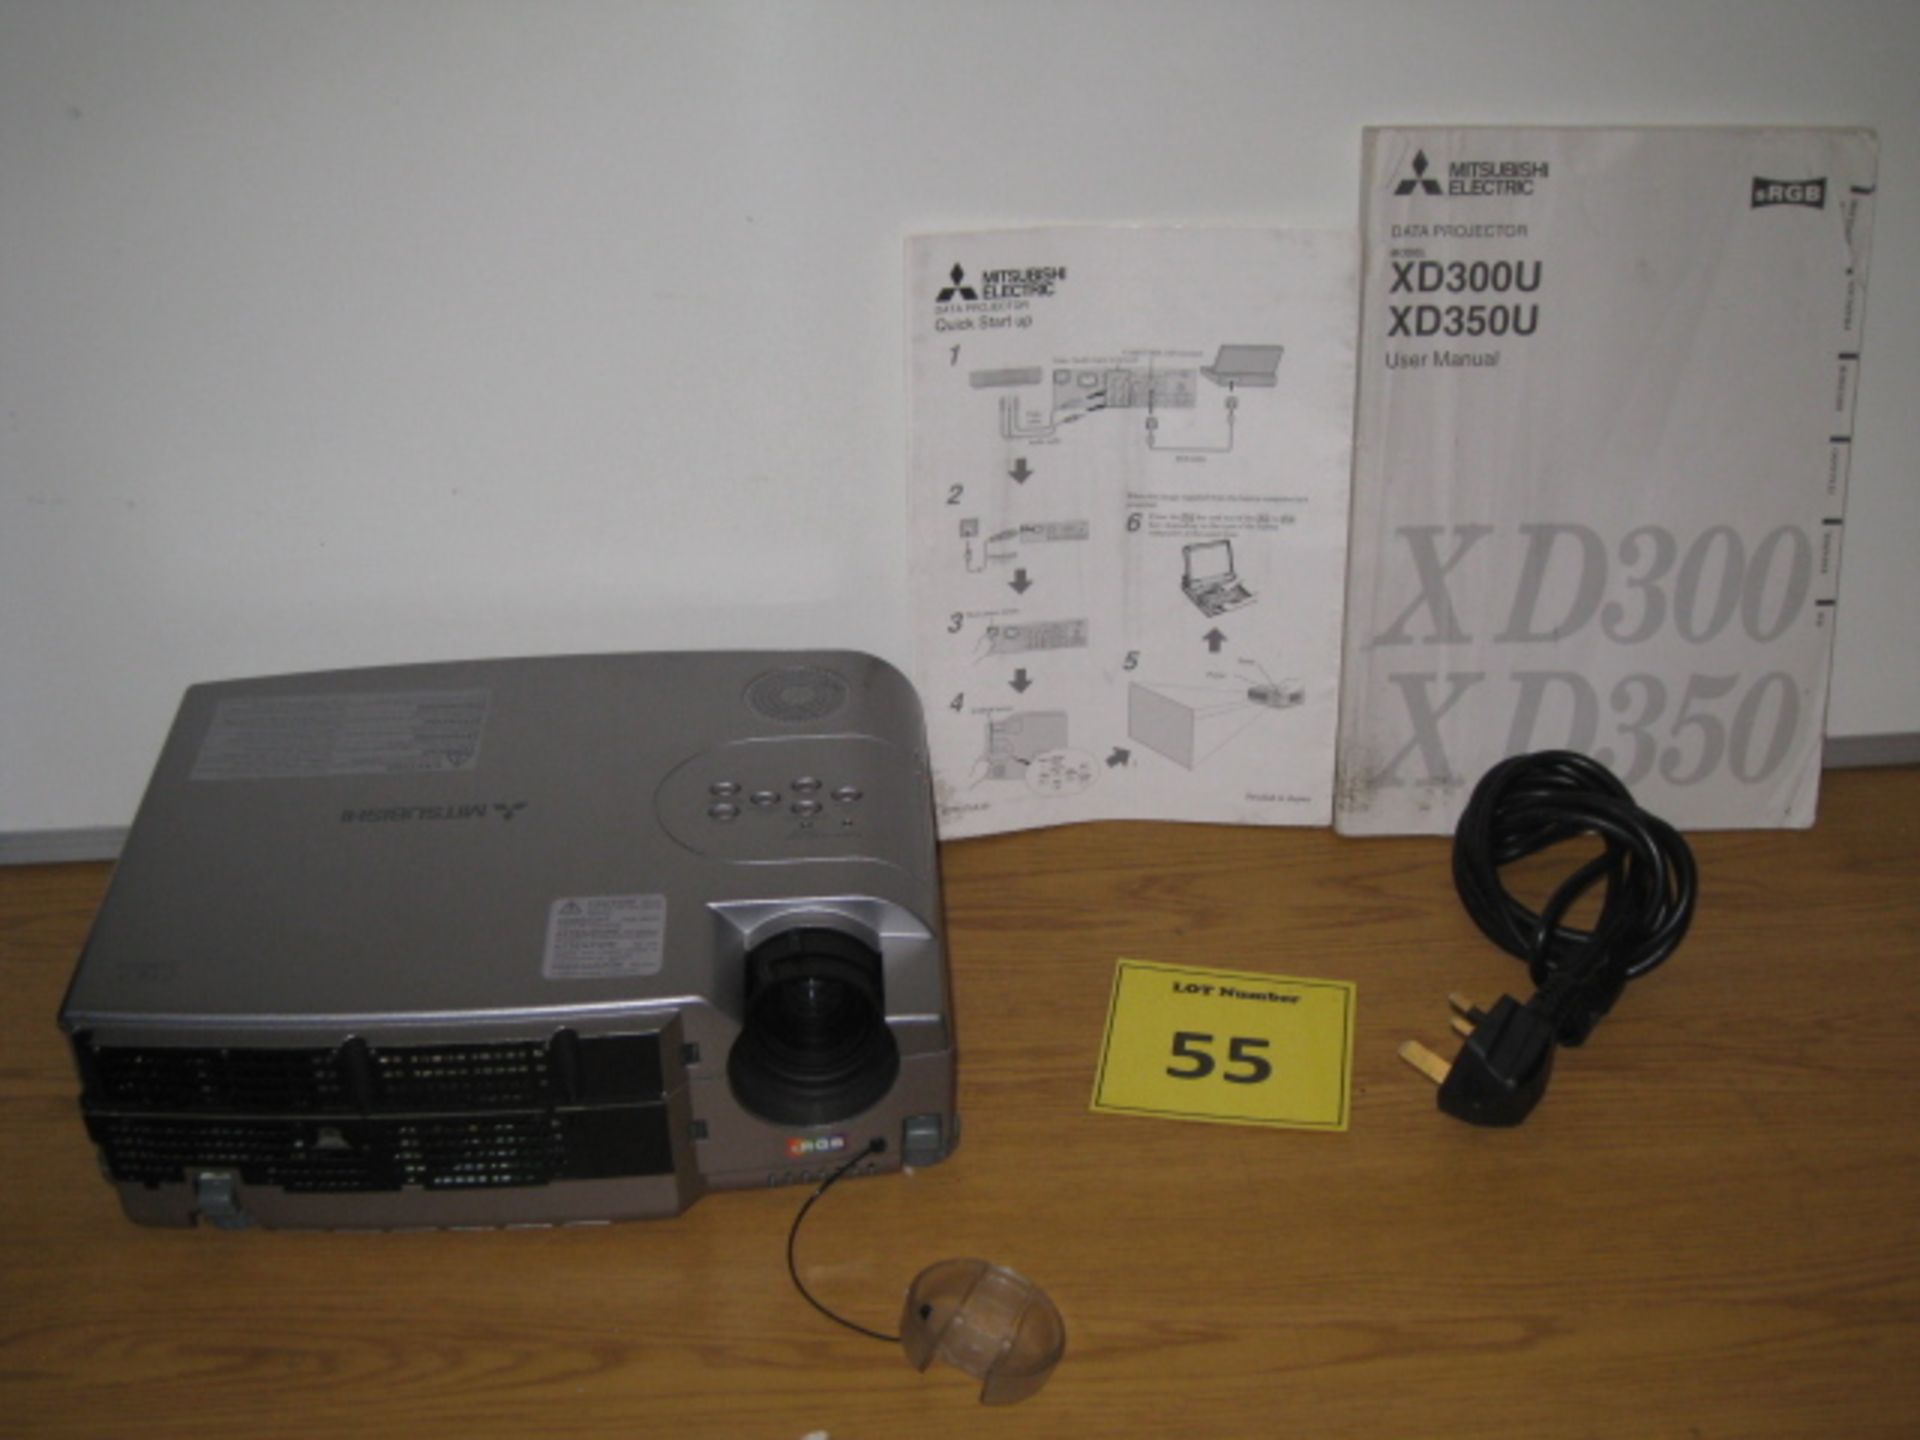 MITSUBISHI XD300U PROJECTOR WITH INSTRUCTION MANUAL AND BRIGHT PROJECTION IMAGE. IN CARRY CASE